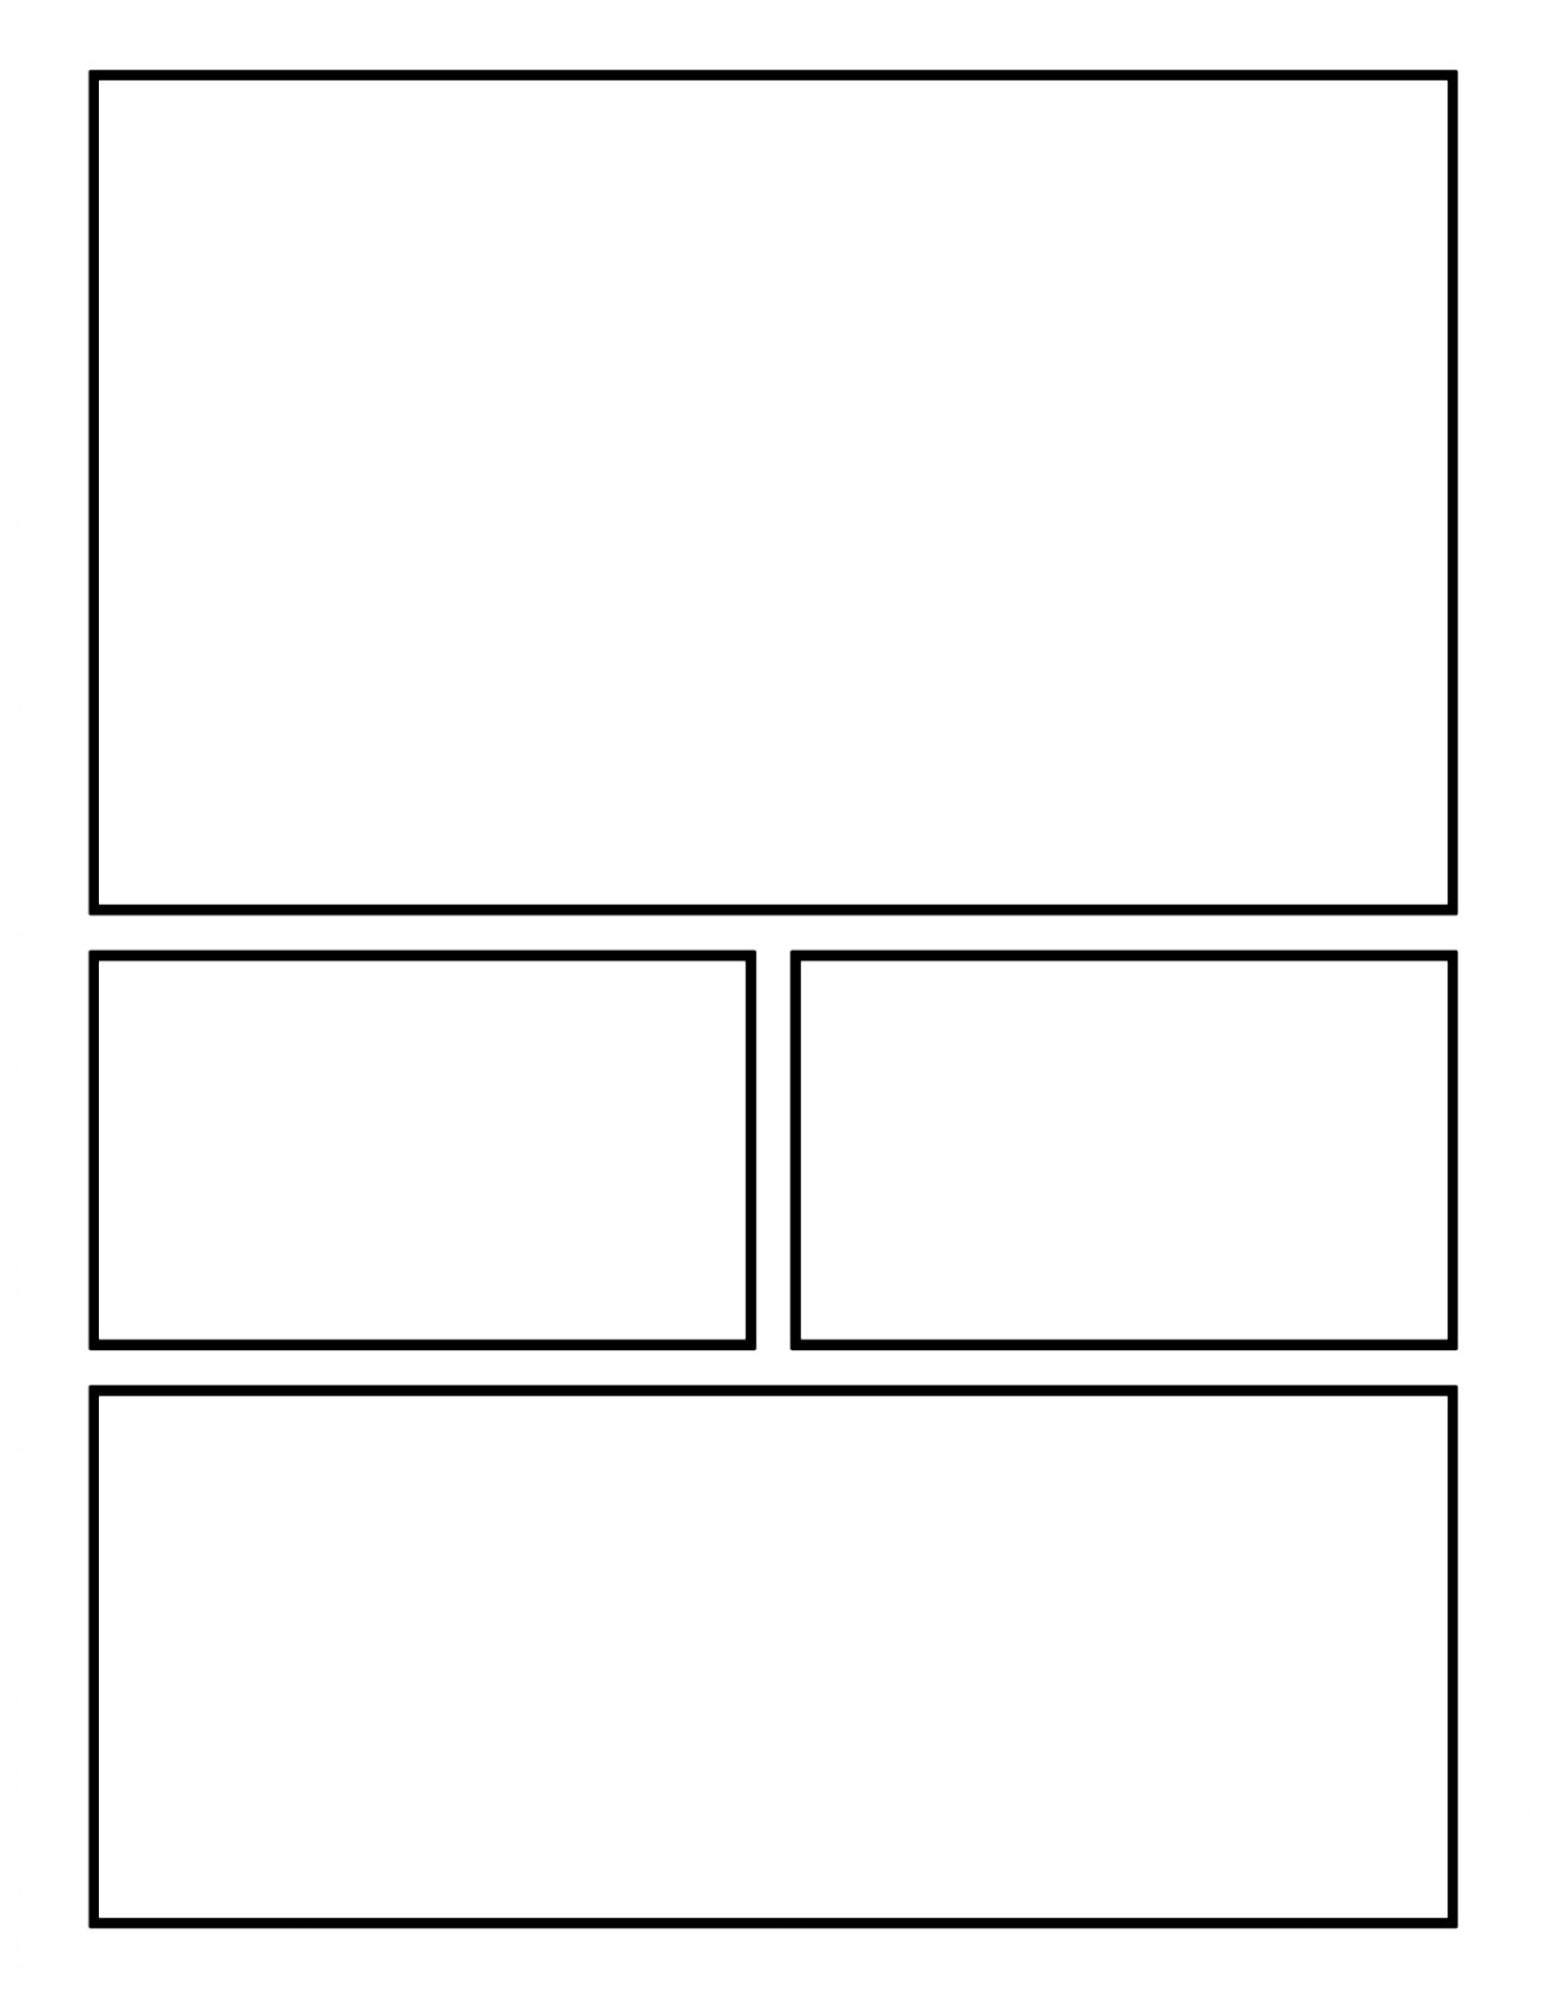 Comic Strip Paper : Blank Comic Creation Book For Kids: Over 100 Templates,  Big Blank Comic Book Pages For Kids (Blank Comic Books)